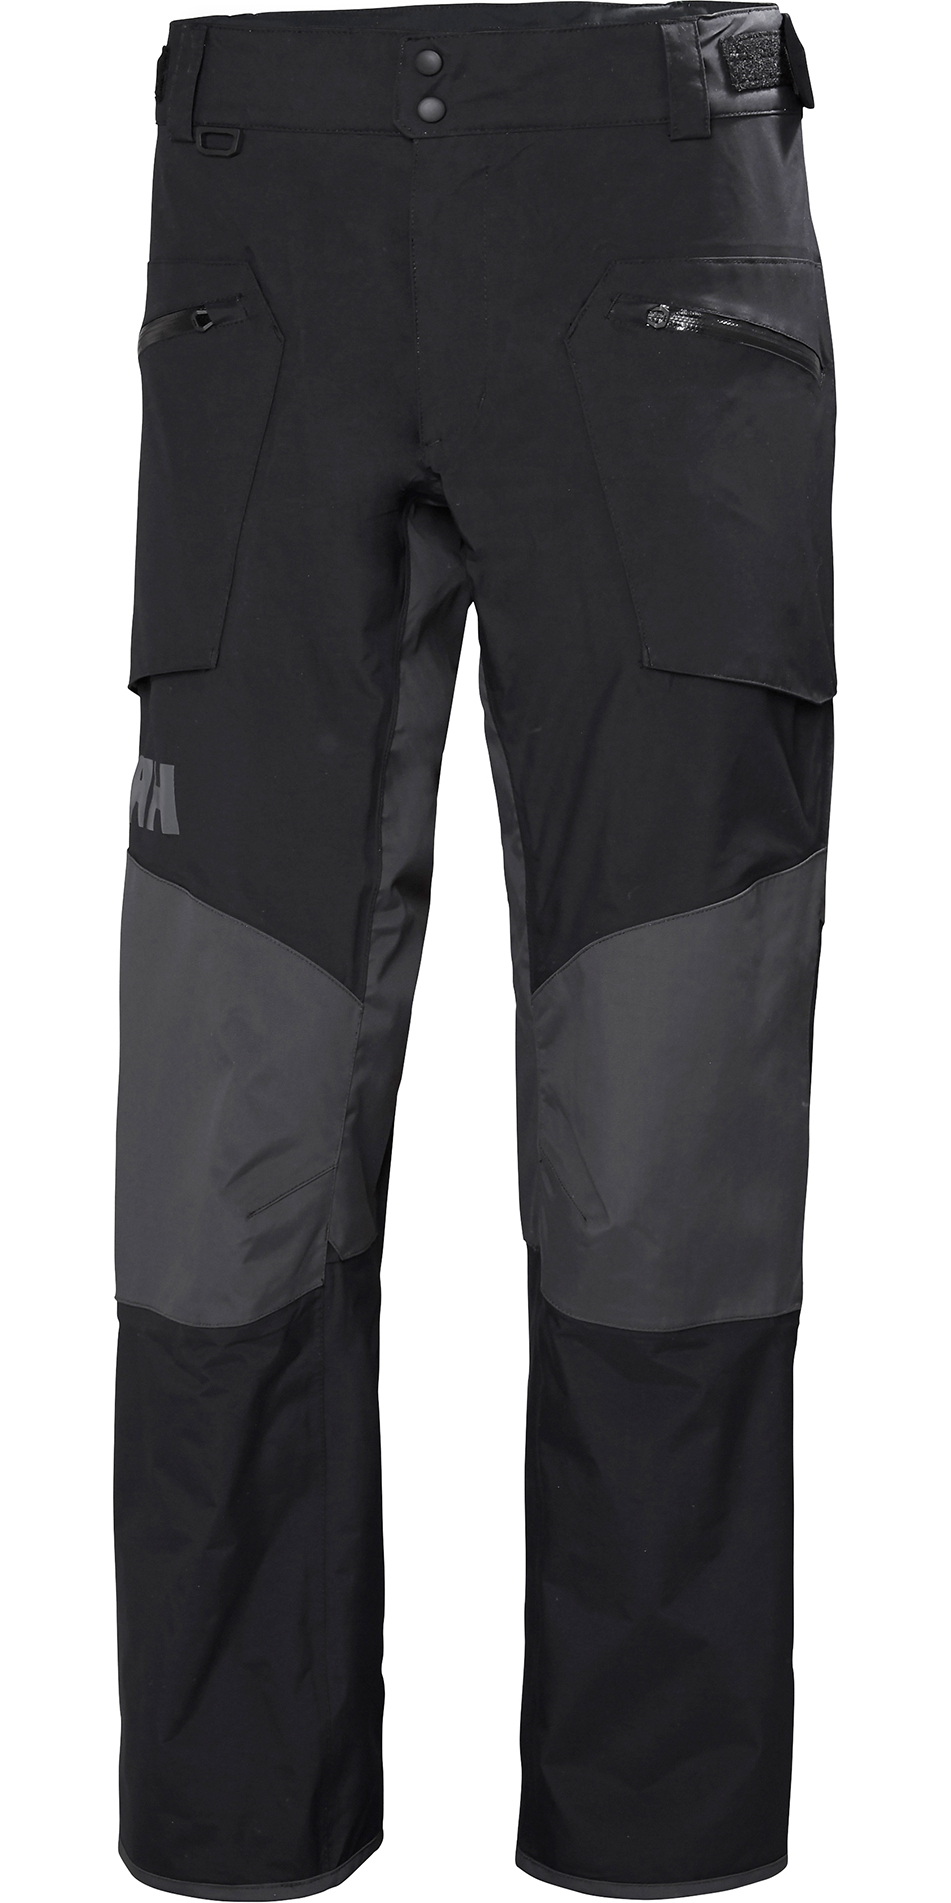 Can not Eight alcove 2022 Helly Hansen Hp Pantalon En Feuille Noir 34011 - Voile - Voile - Yacht  | Watersports Outlet